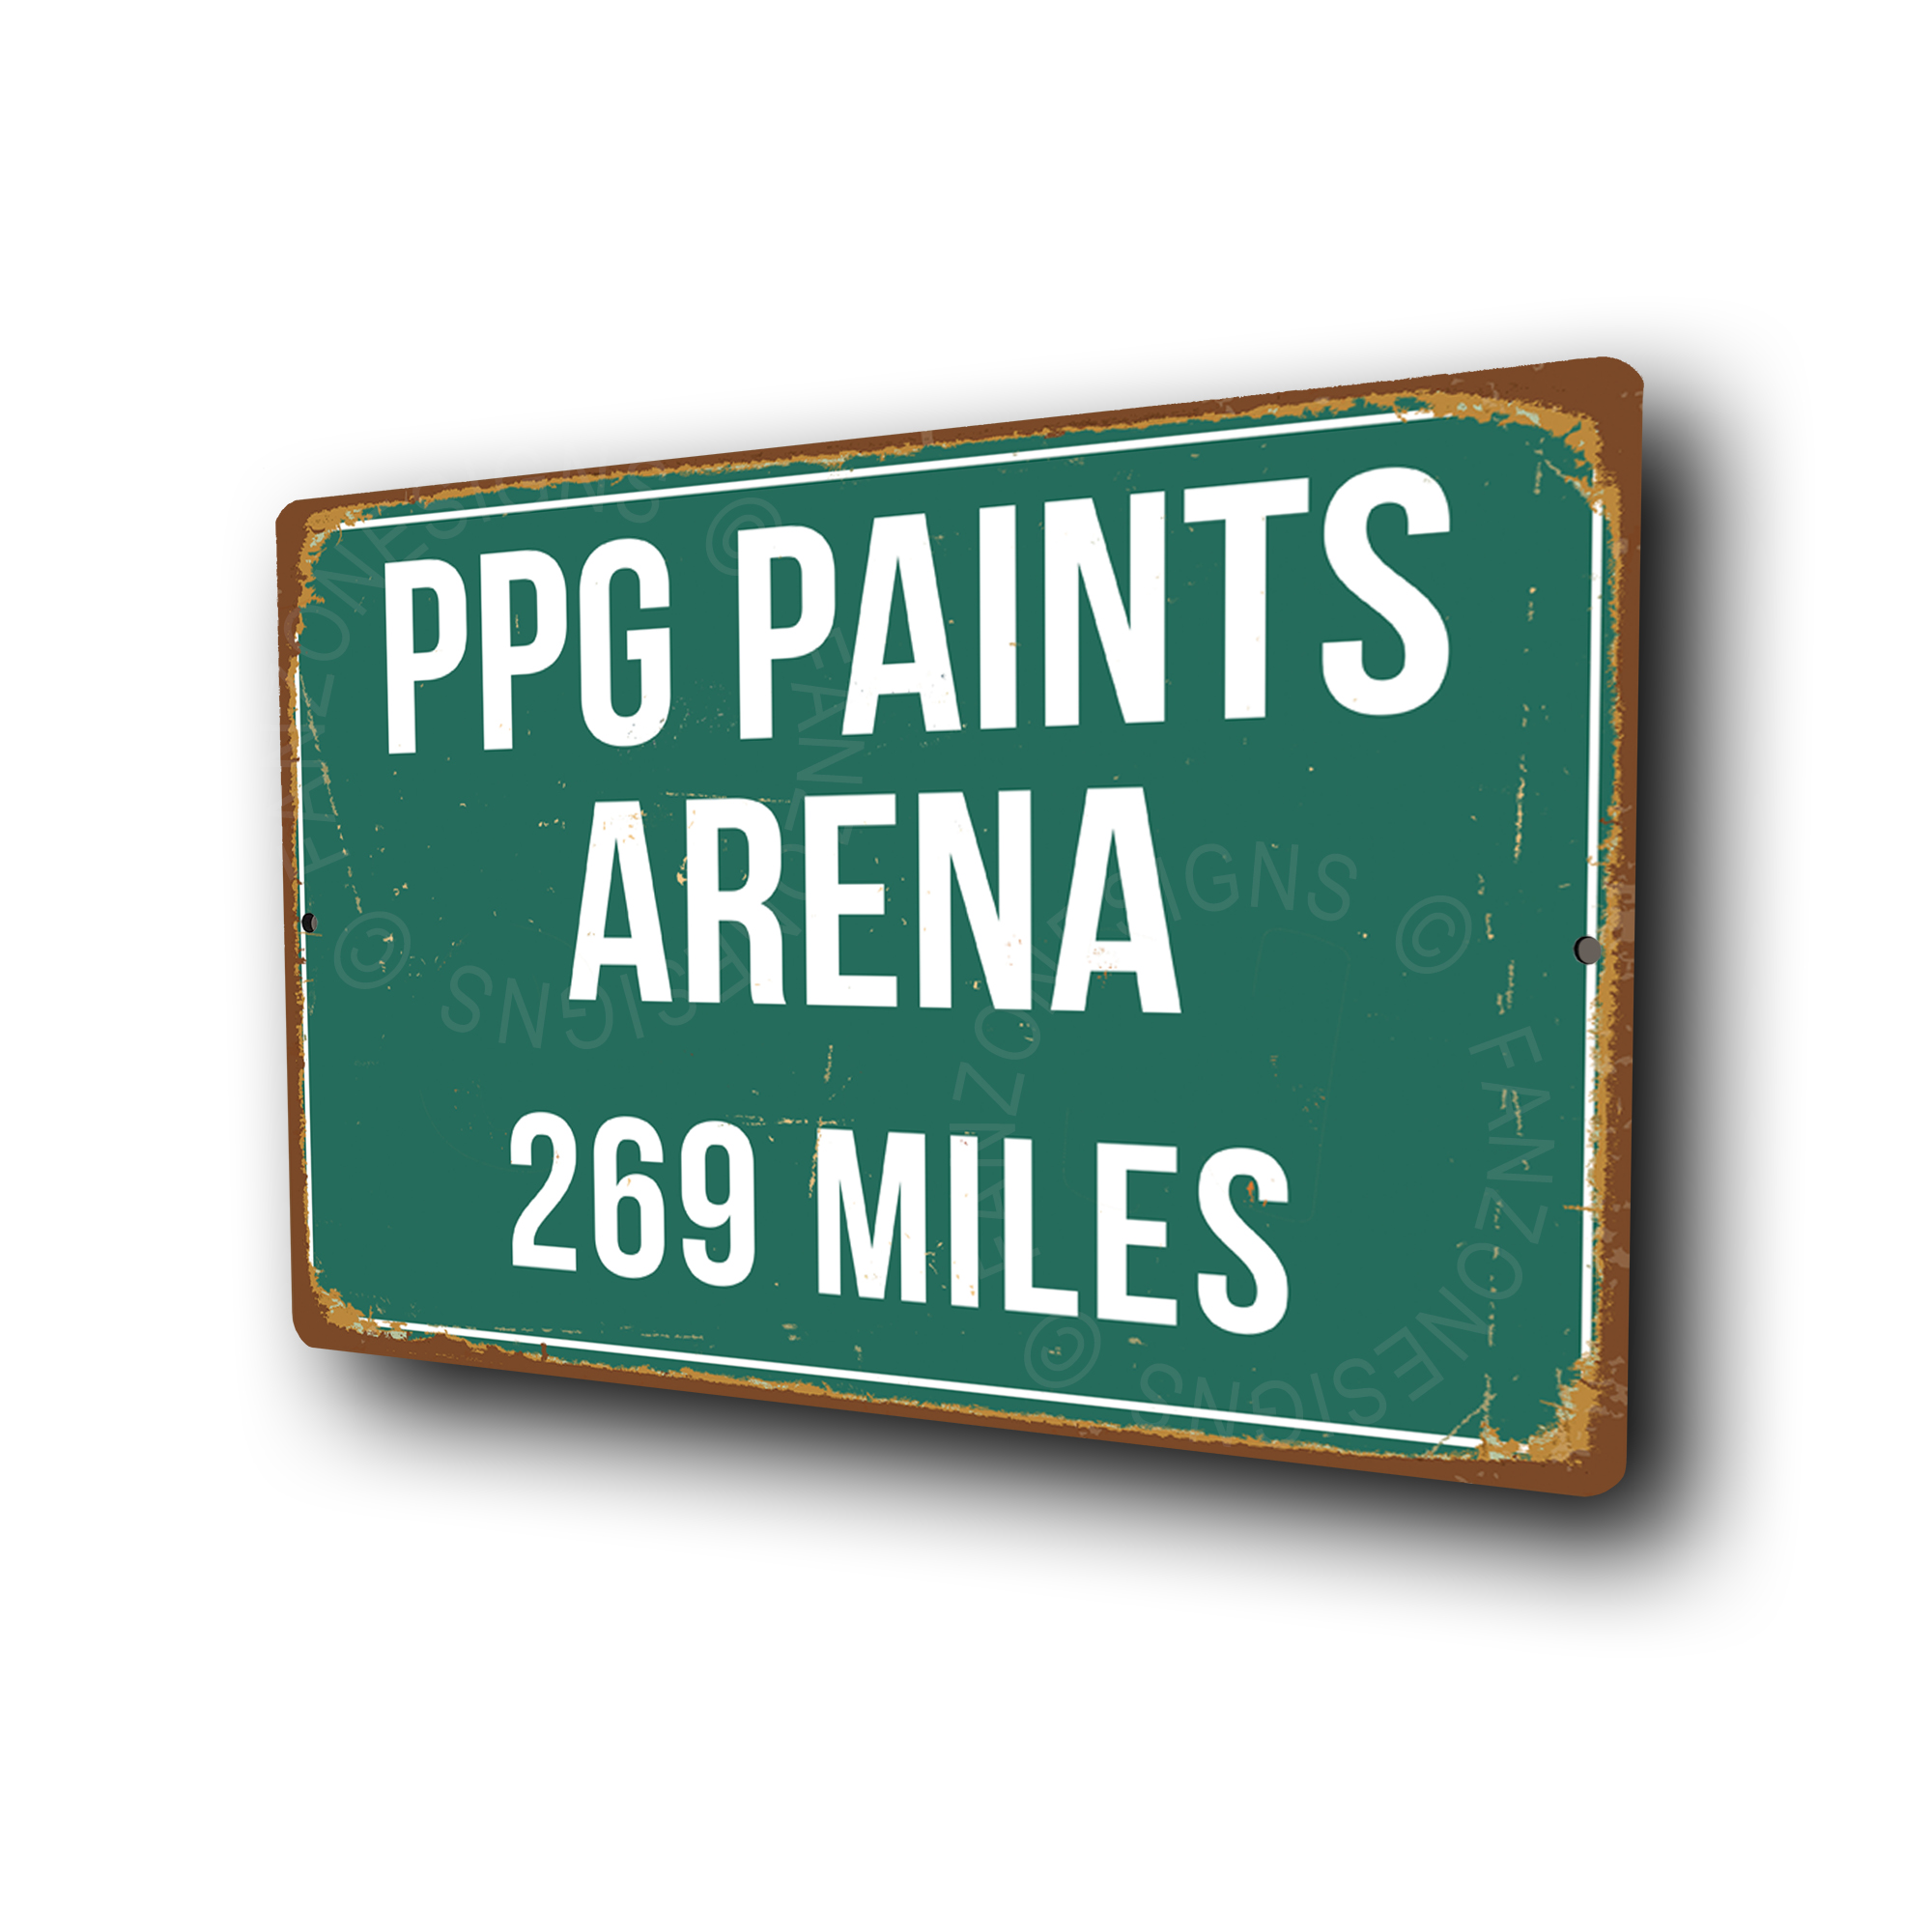 PPG Paints Arena Sign